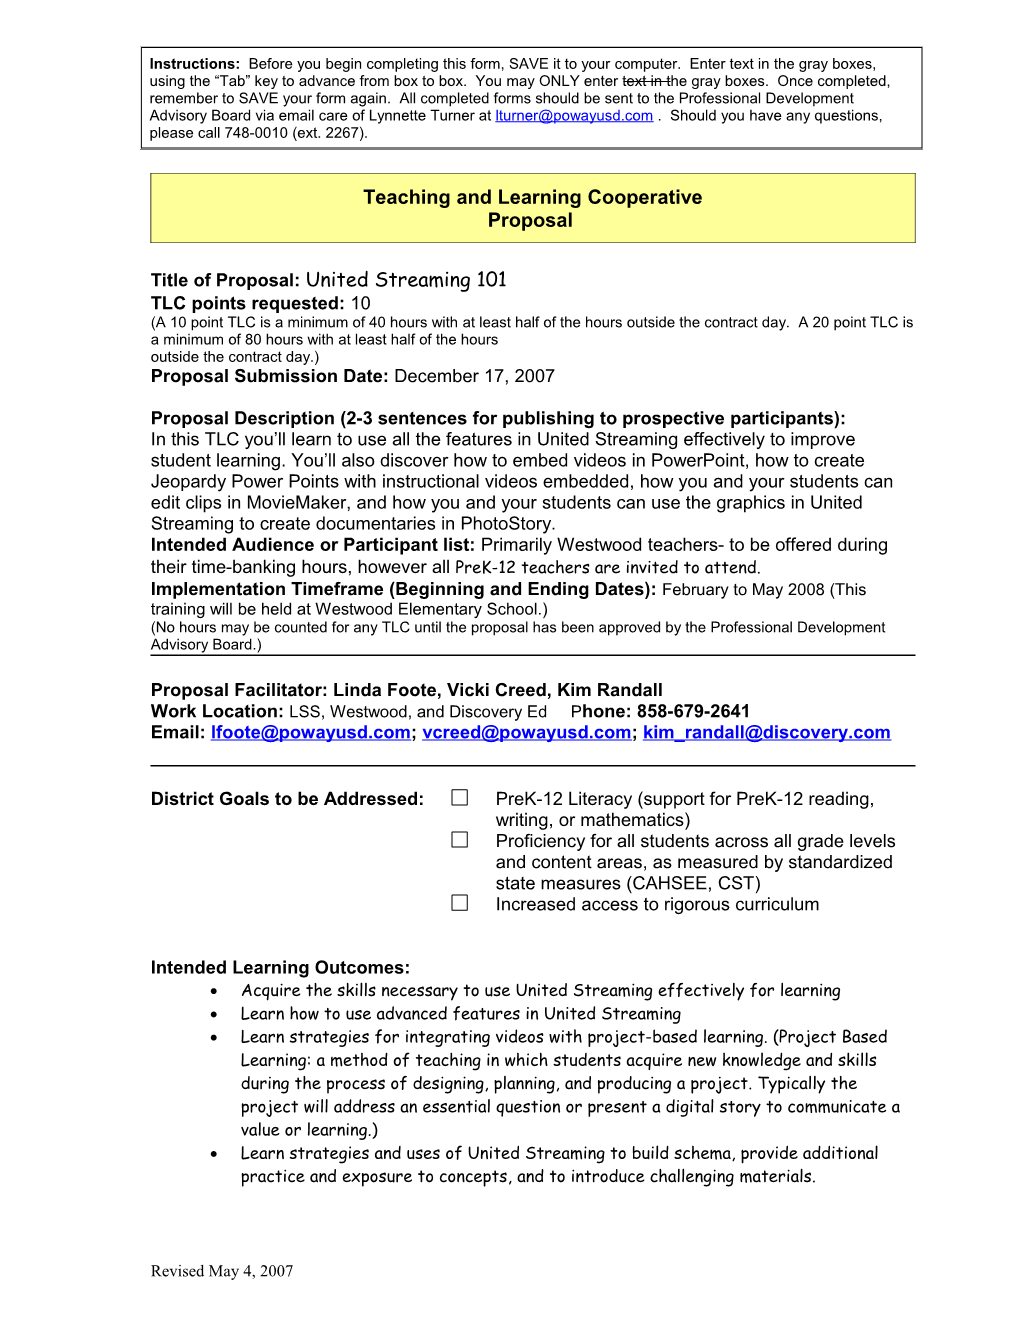 Teaching & Learning Cooperative s4